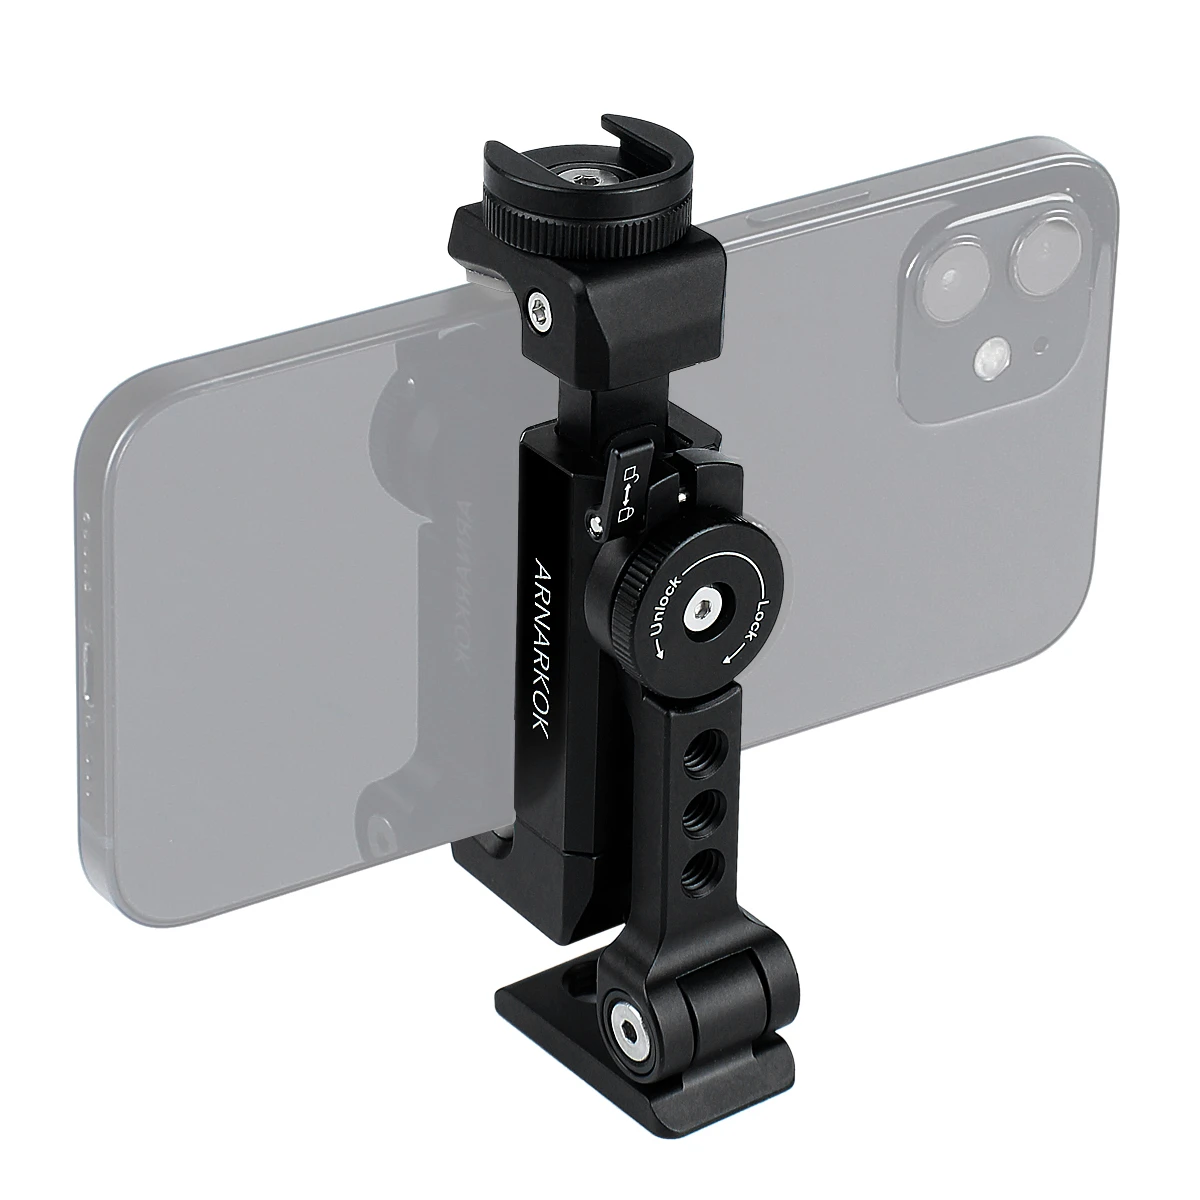 mobile holder for wall 2 IN 1 Metal Phone Tripod Mount +Rotatable Cold Shoe,Compatible with most Smartphone Holder Adapter,Desktop Tripod iphone charging stand